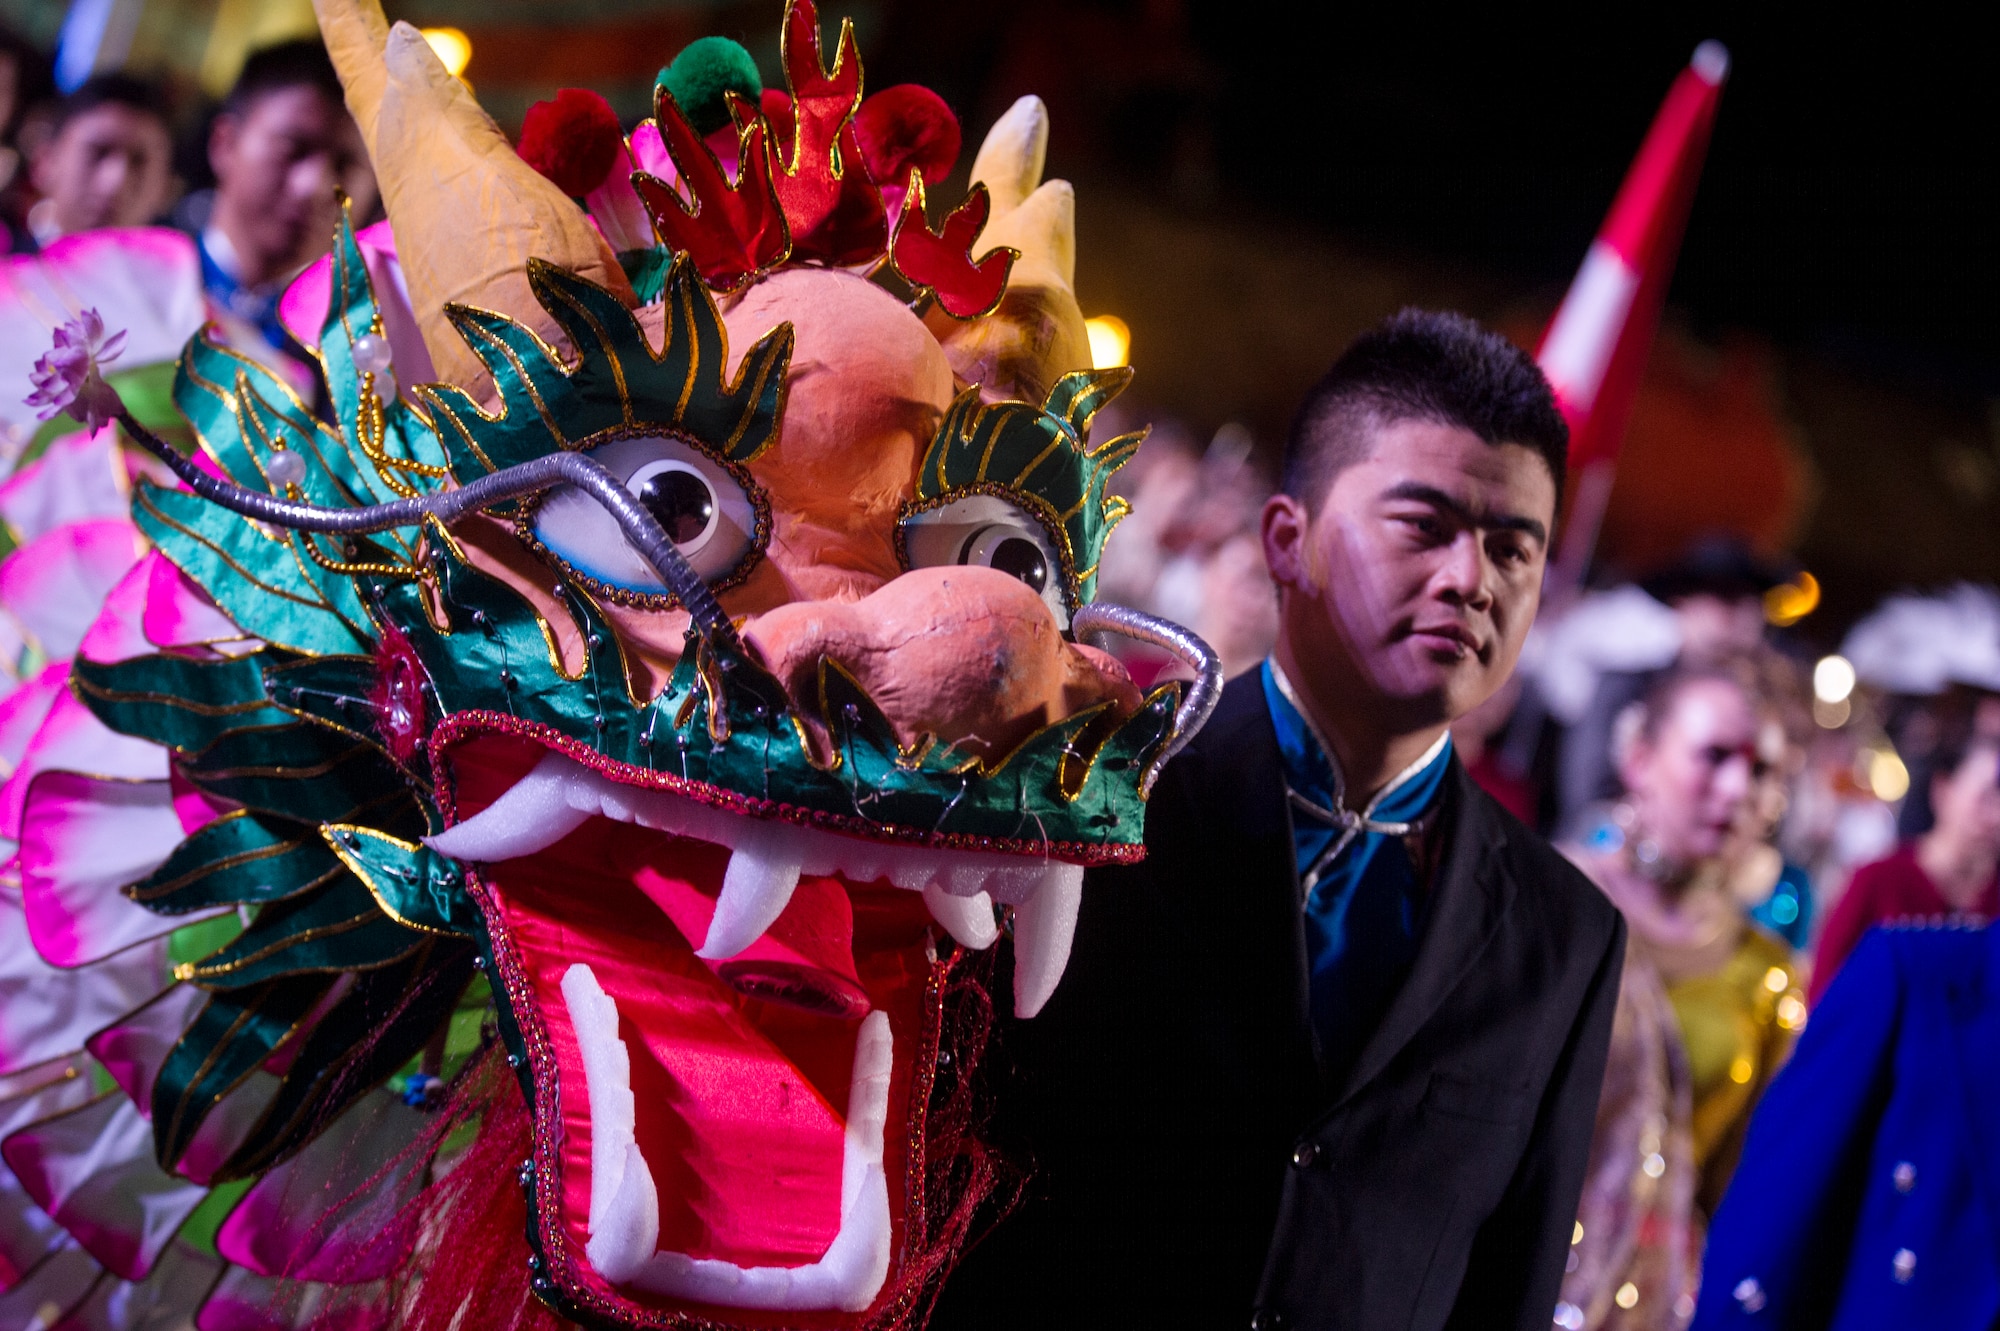 Changxing Lotus Dragon Folklord Group dancer stands in formation during the Royal Edinburg Military Tattoo, Aug. 12, 2015. The award-winning group from Changxing, China is made up of 65 performers. (U.S. Air Force photo/Staff Sgt. Nichelle Anderson/released)